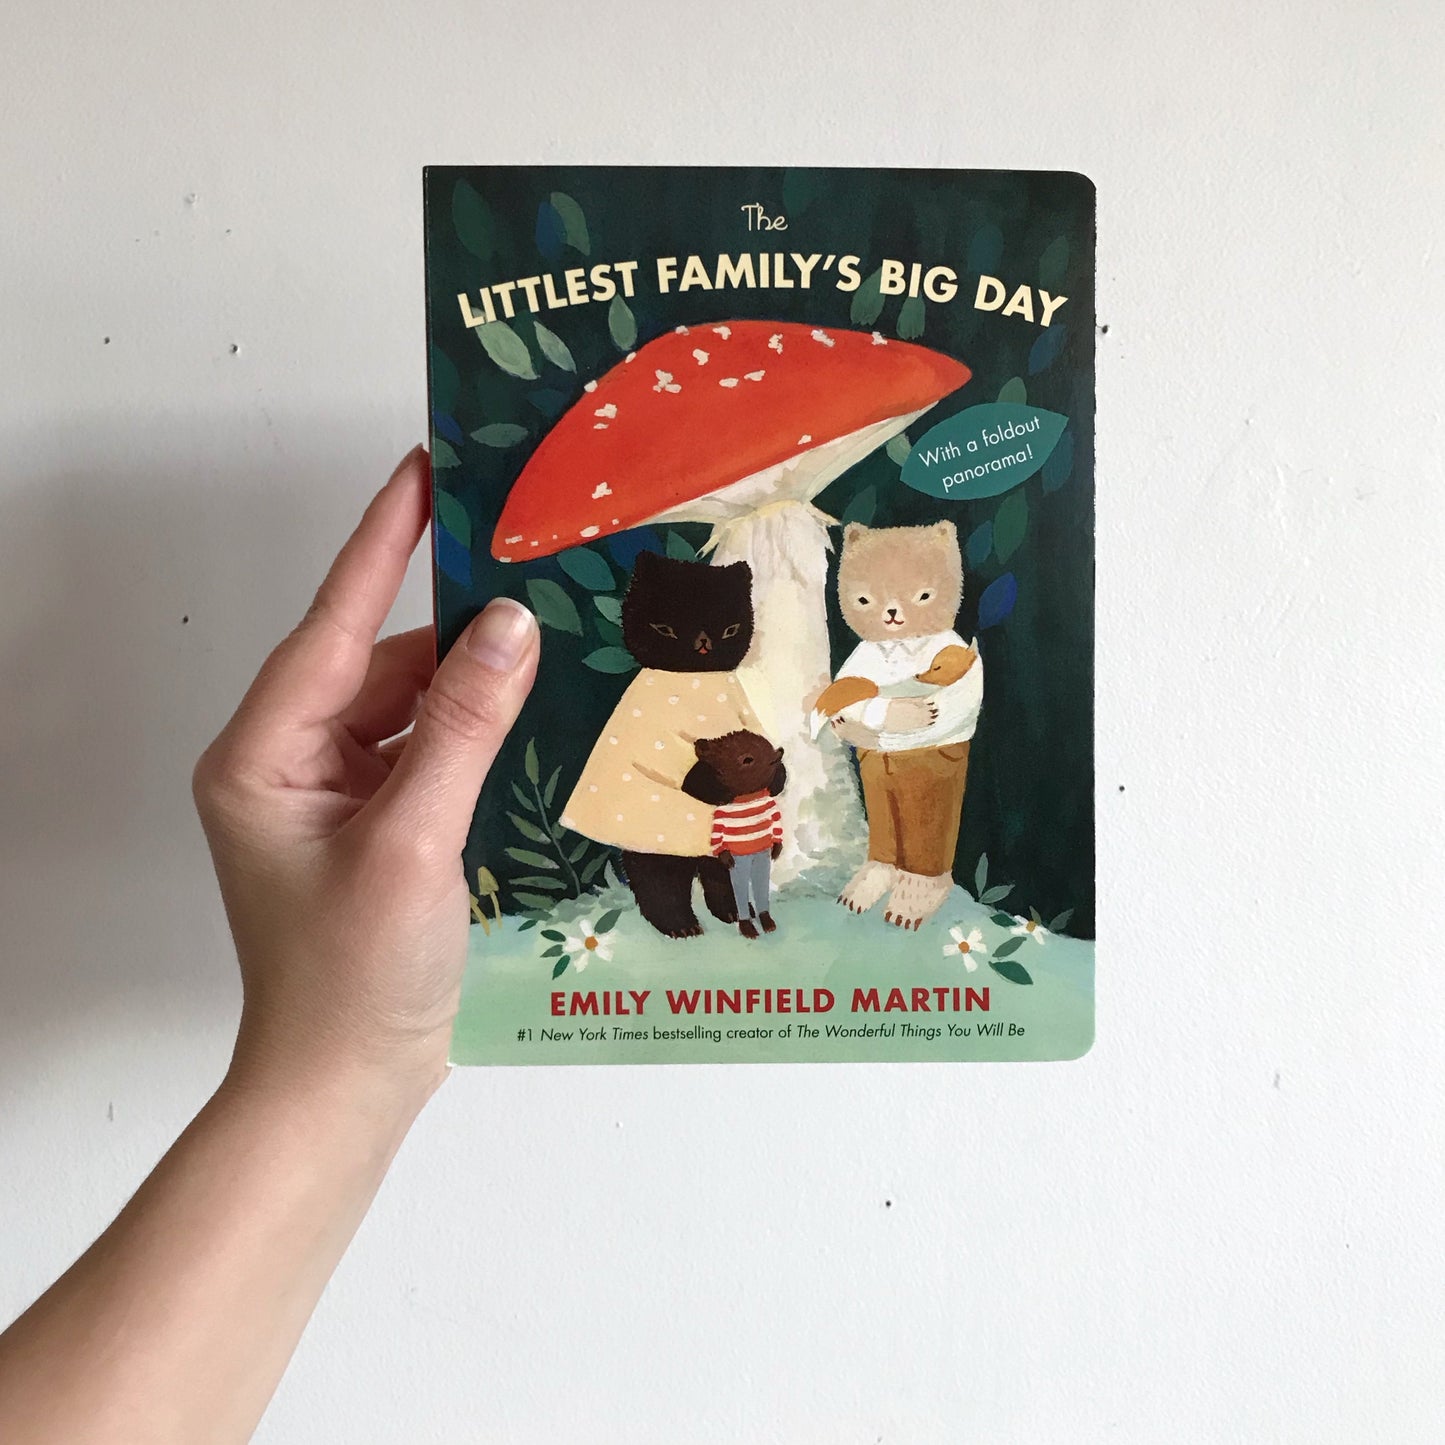 Book: The Littlest Family's Big Day